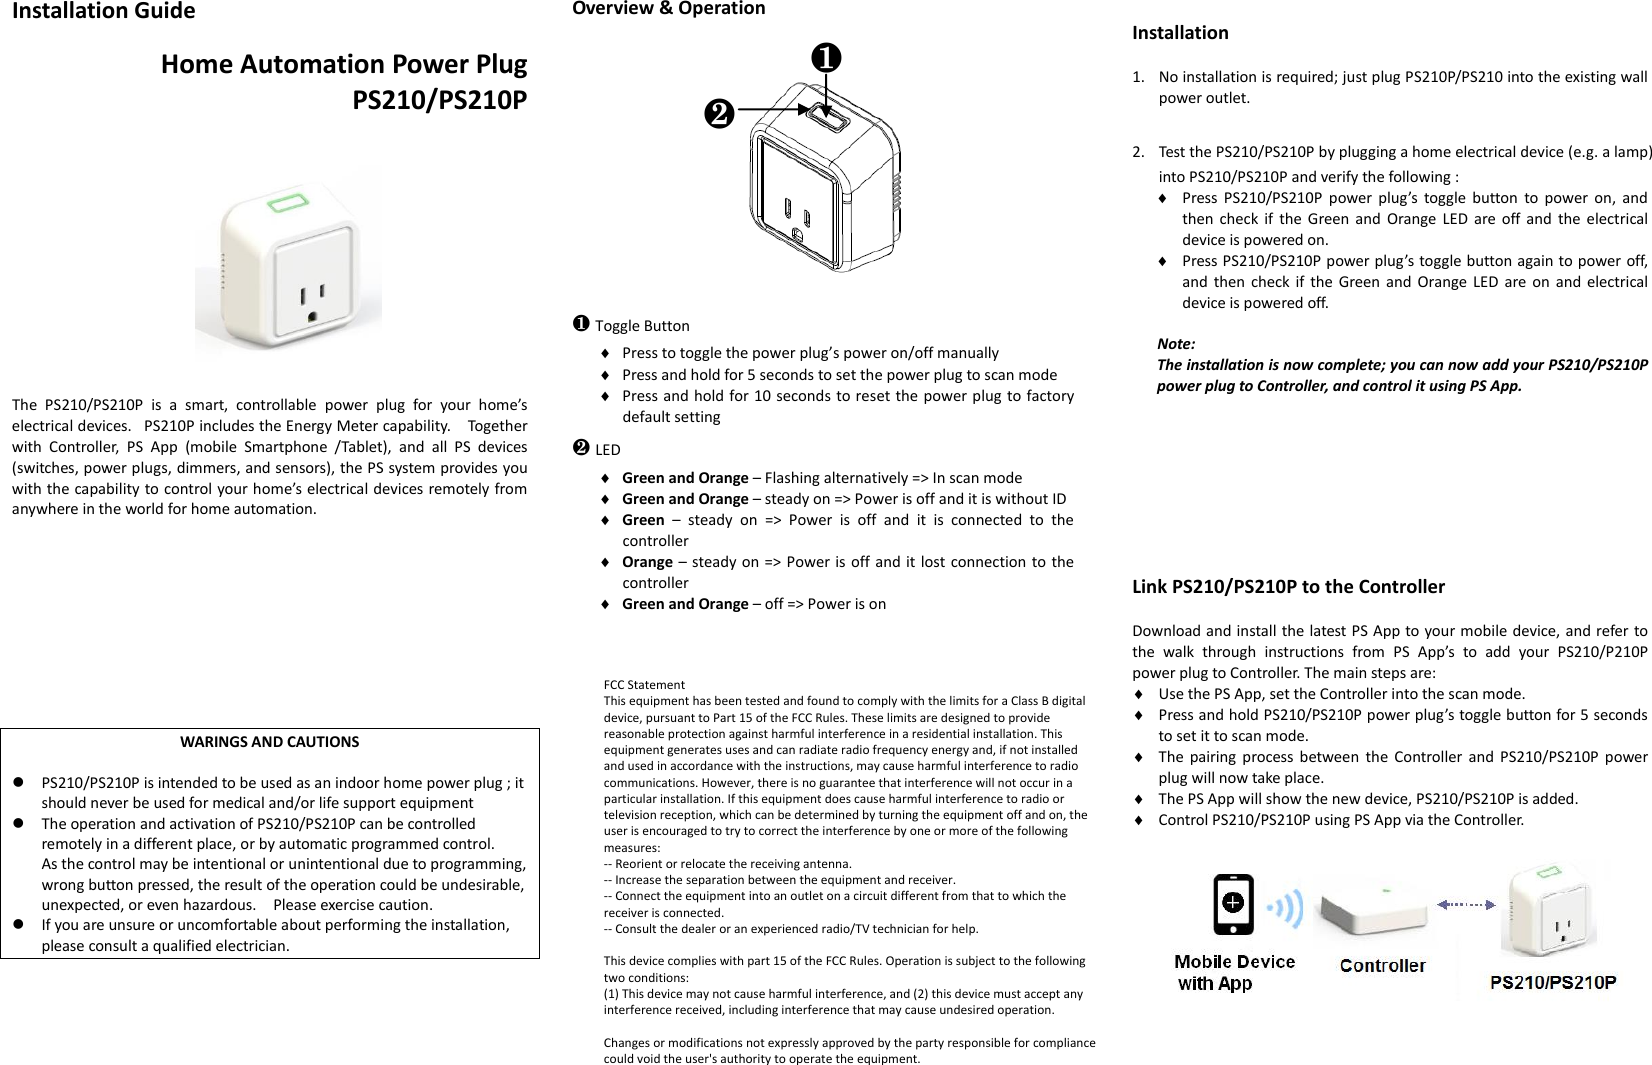 Installation Guide Home Automation Power Plug PS210/PS210P The  PS210/PS210P  is  a  smart,  controllable  power  plug  for  your  home’s electrical devices.   PS210P includes the Energy Meter capability.    Together with  Controller,  PS  App  (mobile  Smartphone  /Tablet),  and  all  PS  devices (switches, power plugs, dimmers, and sensors), the PS system provides you with the capability to control your home’s electrical devices remotely from anywhere in the world for home automation. WARINGS AND CAUTIONS PS210/PS210P is intended to be used as an indoor home power plug ; it should never be used for medical and/or life support equipmentThe operation and activation of PS210/PS210P can be controlled remotely in a different place, or by automatic programmed control. As the control may be intentional or unintentional due to programming,wrong button pressed, the result of the operation could be undesirable,unexpected, or even hazardous.    Please exercise caution. If you are unsure or uncomfortable about performing the installation, please consult a qualified electrician.Overview &amp; Operation      ❶Toggle Button Press to toggle the power plug’s power on/off manually  Press and hold for 5 seconds to set the power plug to scan mode  Press and hold for 10 seconds to reset the power plug to factory default setting ❷LED  Green and Orange – Flashing alternatively =&gt; In scan mode  Green and Orange – steady on =&gt; Power is off and it is without ID  Green  –  steady  on  =&gt;  Power  is  off  and  it  is  connected  to  the controller  Orange – steady on =&gt; Power is off and it lost connection to the controller  Green and Orange – off =&gt; Power is on Installation 1. No installation is required; just plug PS210P/PS210 into the existing wall power outlet.2. Test the PS210/PS210P by plugging a home electrical device (e.g. a lamp) into PS210/PS210P and verify the following :  Press  PS210/PS210P  power  plug’s  toggle  button  to  power on,  andthen check  if  the Green and  Orange  LED are off and  the electrical device is powered on.  Press PS210/PS210P power plug’s toggle button again to power off, and  then  check  if  the  Green  and  Orange LED  are on  and  electrical device is powered off. Note: The installation is now complete; you can now add your PS210/PS210P power plug to Controller, and control it using PS App. Link PS210/PS210P to the Controller Download and install the latest PS App to your mobile device, and refer to the  walk  through  instructions  from  PS  App’s  to  add  your  PS210/P210P power plug to Controller. The main steps are:  Use the PS App, set the Controller into the scan mode.  Press and hold PS210/PS210P power plug’s toggle button for 5 seconds to set it to scan mode.  The pairing process  between  the  Controller and  PS210/PS210P power plug will now take place.  The PS App will show the new device, PS210/PS210P is added.  Control PS210/PS210P using PS App via the Controller. ❶❷FCC StatementThis equipment has been tested and found to comply with the limits for a Class B digital device, pursuant to Part 15 of the FCC Rules. These limits are designed to provide reasonable protection against harmful interference in a residential installation. This equipment generates uses and can radiate radio frequency energy and, if not installed and used in accordance with the instructions, may cause harmful interference to radio communications. However, there is no guarantee that interference will not occur in a particular installation. If this equipment does cause harmful interference to radio or television reception, which can be determined by turning the equipment off and on, the user is encouraged to try to correct the interference by one or more of the following measures:-- Reorient or relocate the receiving antenna.  -- Increase the separation between the equipment and receiver.   -- Connect the equipment into an outlet on a circuit different from that to which the receiver is connected.  -- Consult the dealer or an experienced radio/TV technician for help.This device complies with part 15 of the FCC Rules. Operation is subject to the following two conditions:(1) This device may not cause harmful interference, and (2) this device must accept any interference received, including interference that may cause undesired operation.Changes or modifications not expressly approved by the party responsible for compliance could void the user&apos;s authority to operate the equipment.